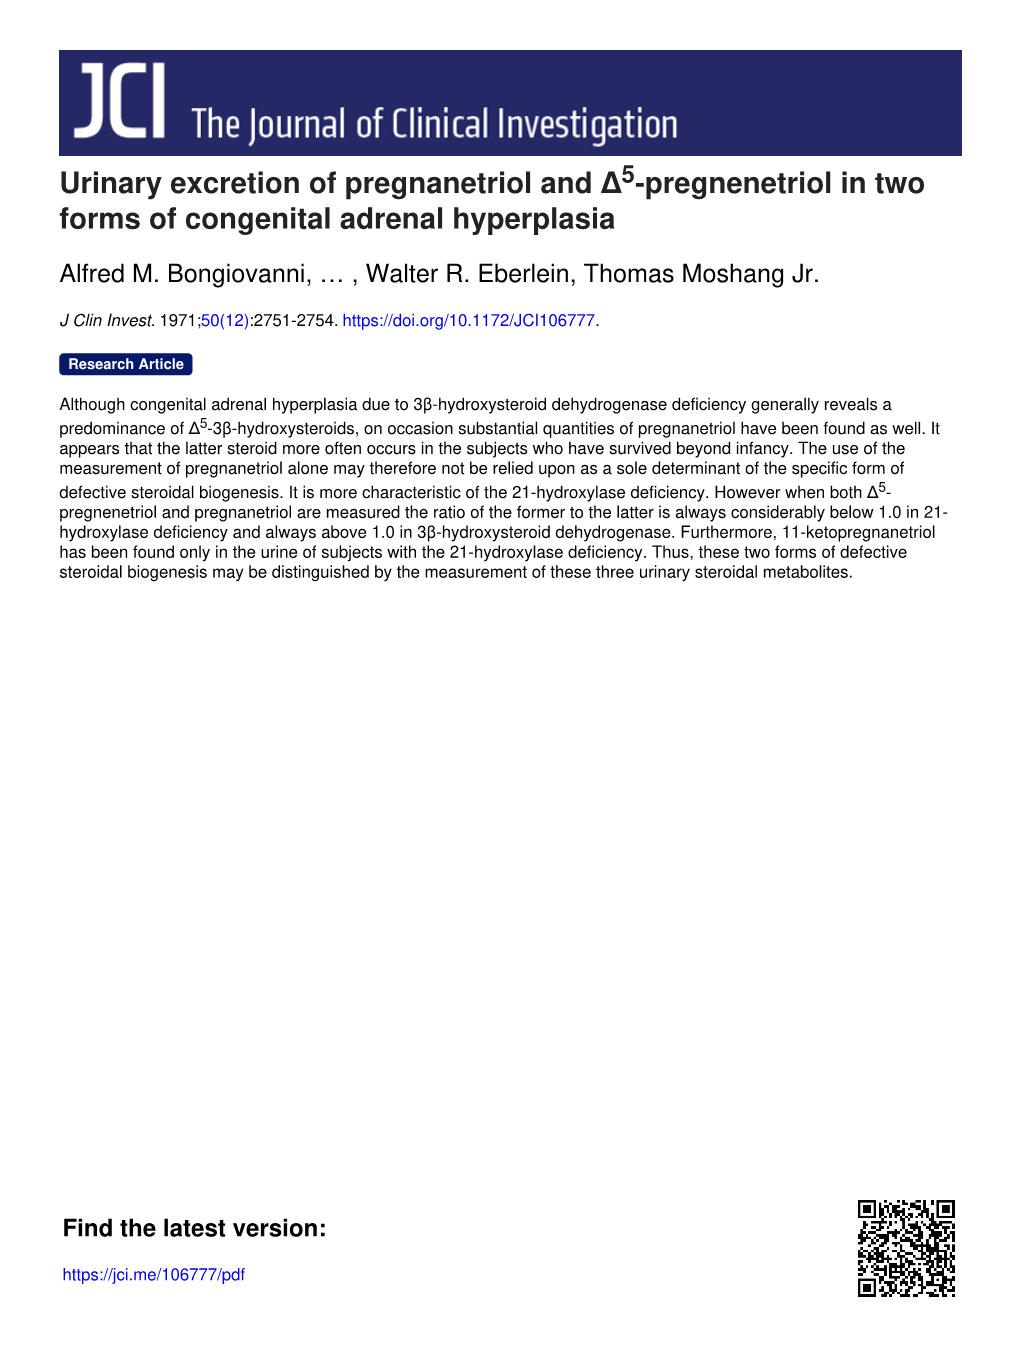 Urinary Excretion of Pregnanetriol and Δ5-Pregnenetriol in Two Forms of Congenital Adrenal Hyperplasia